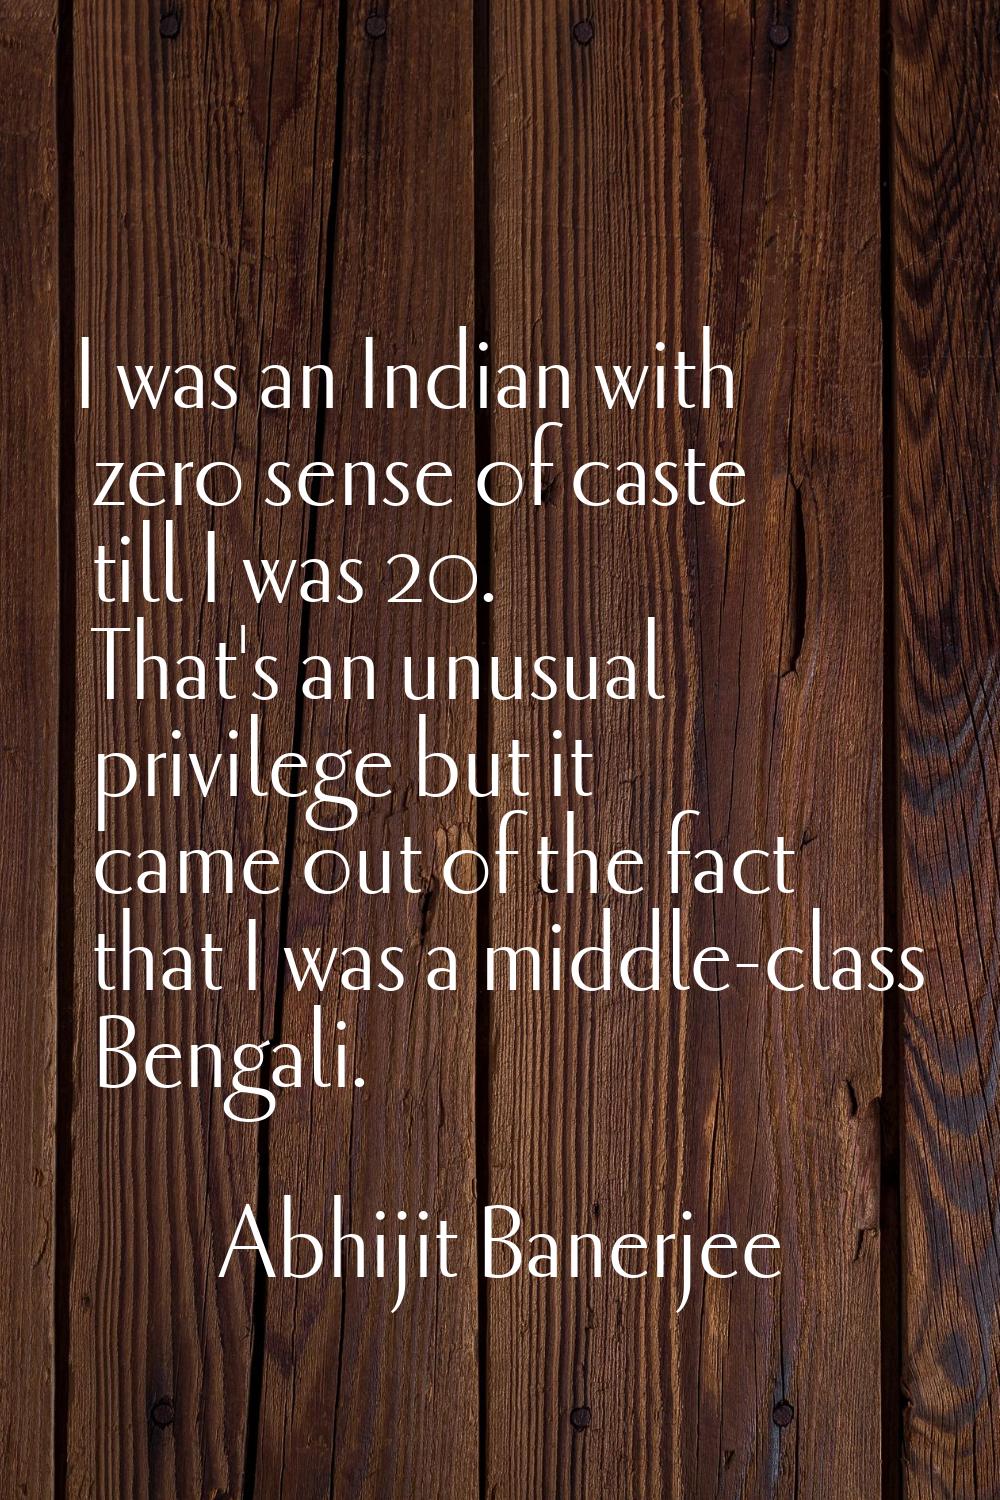 I was an Indian with zero sense of caste till I was 20. That's an unusual privilege but it came out